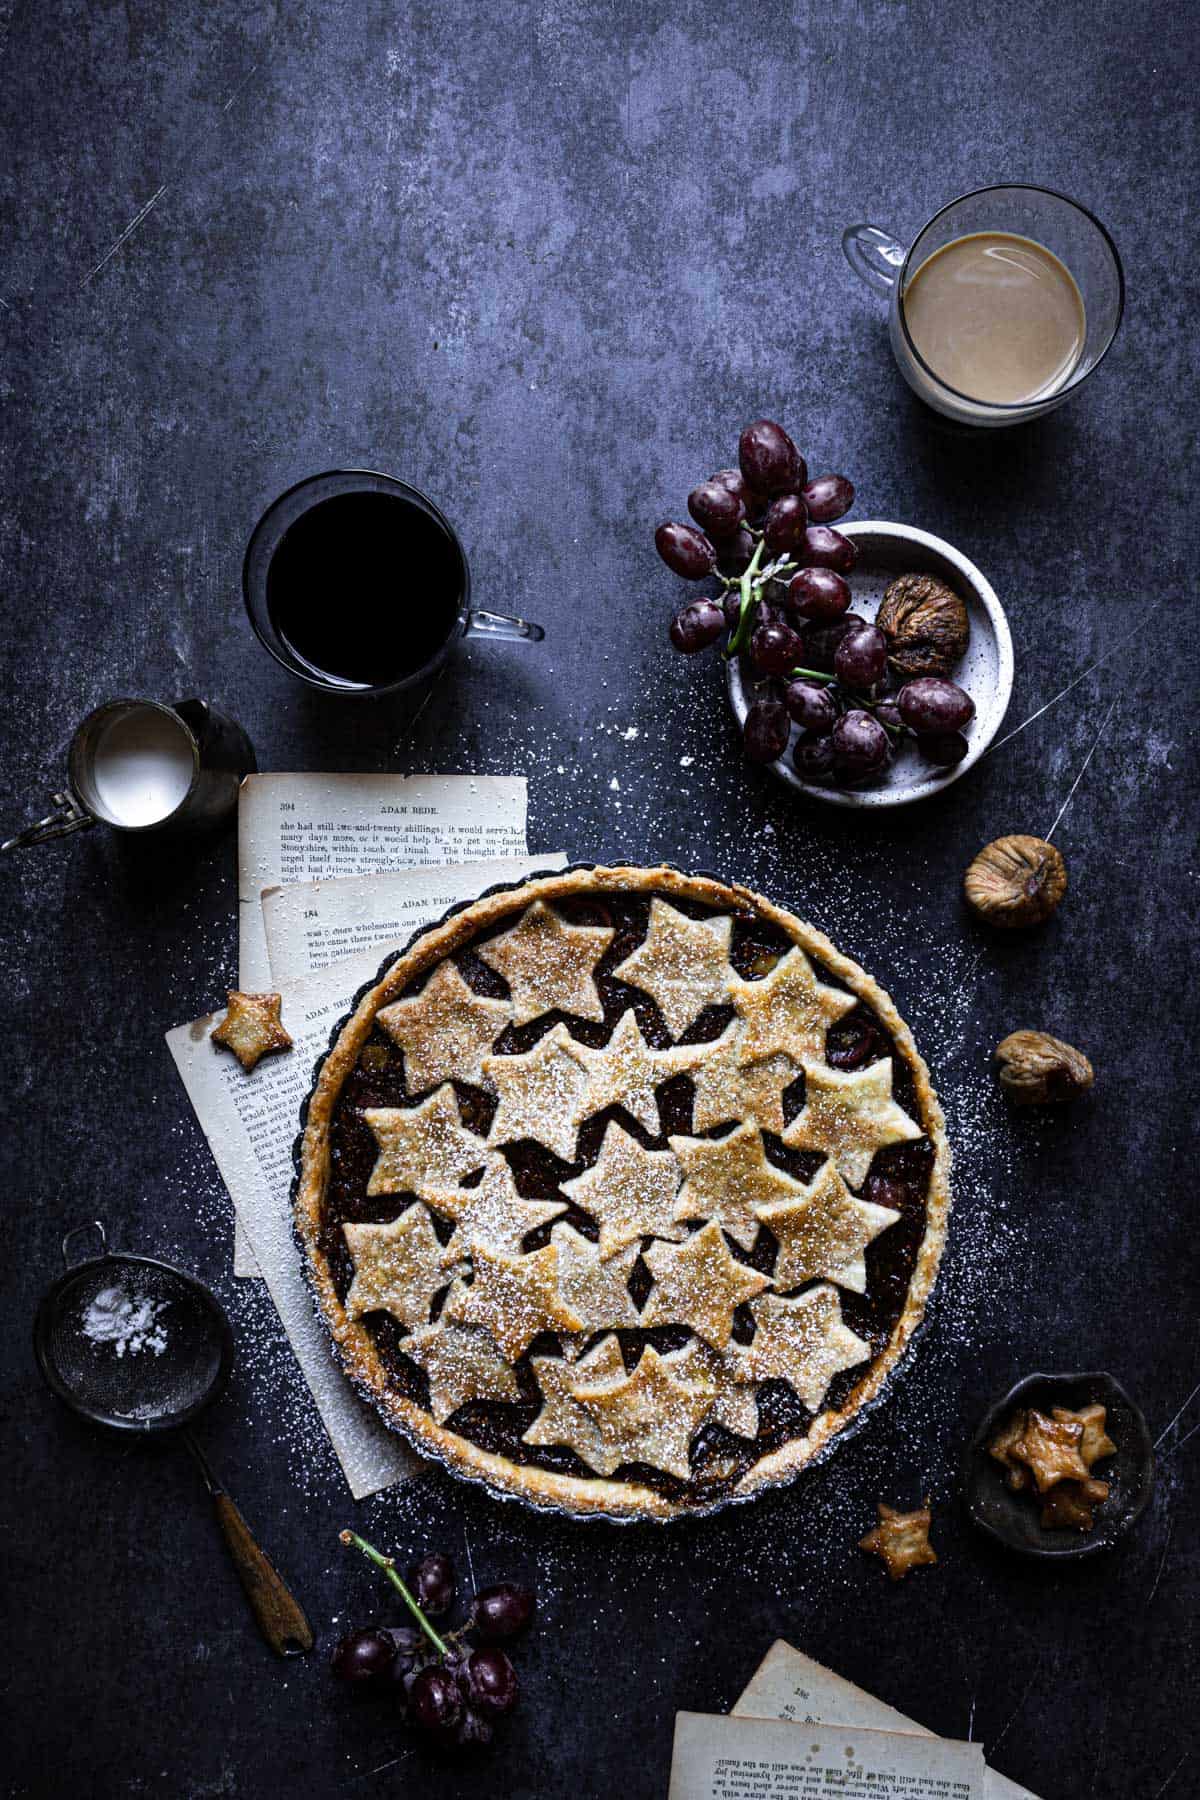 Dried and fresh fruit pie with nostalgic flavors.